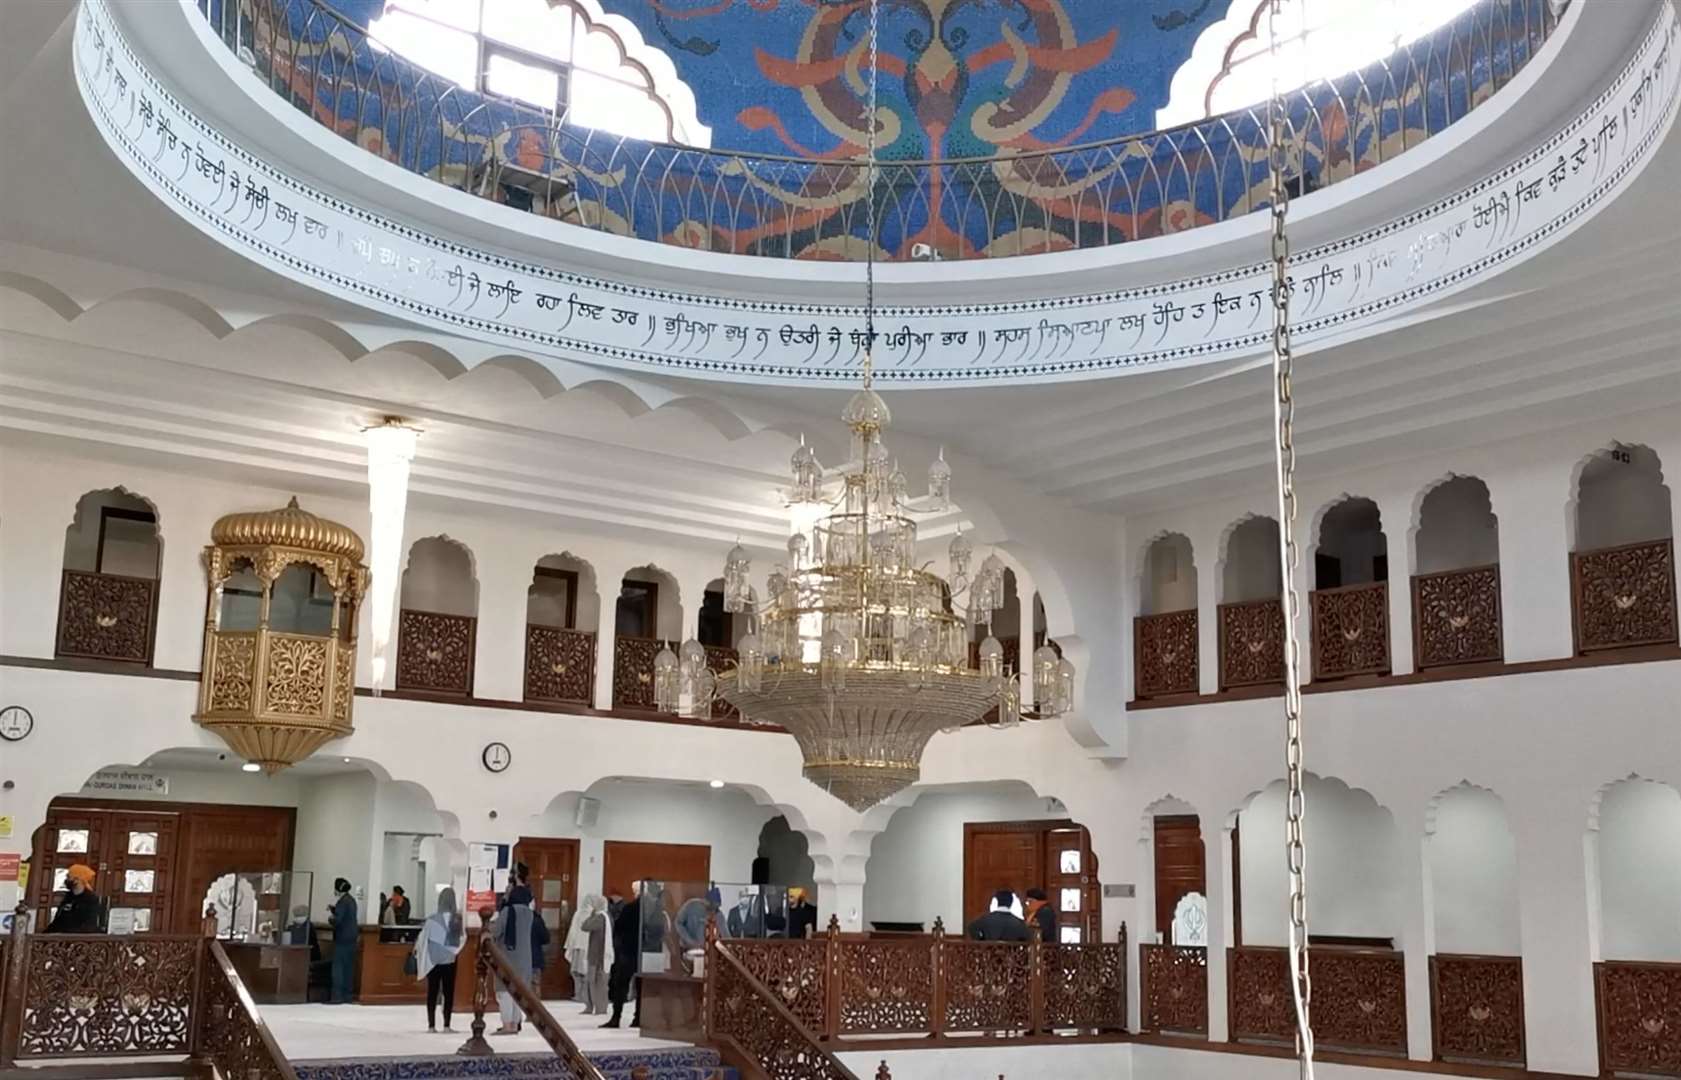 Many people who visit the gurdwara have families out in India (46832971)